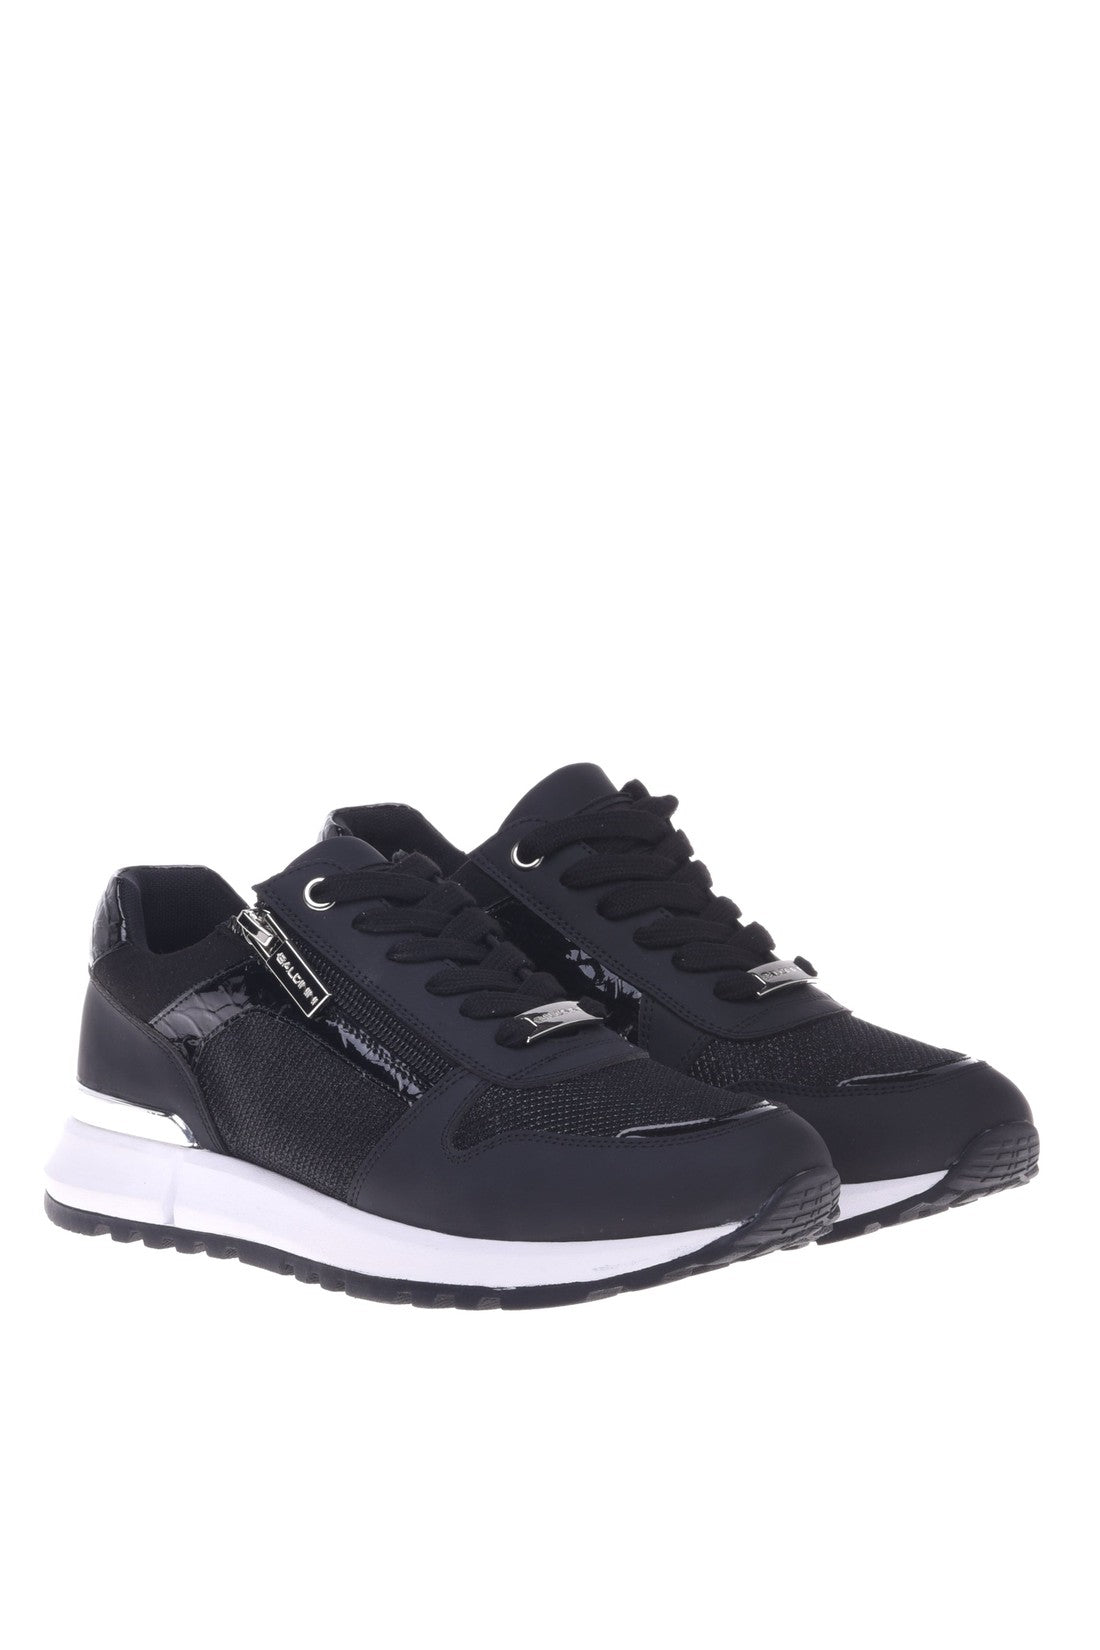 Sneaker in black nappa leather and fabric